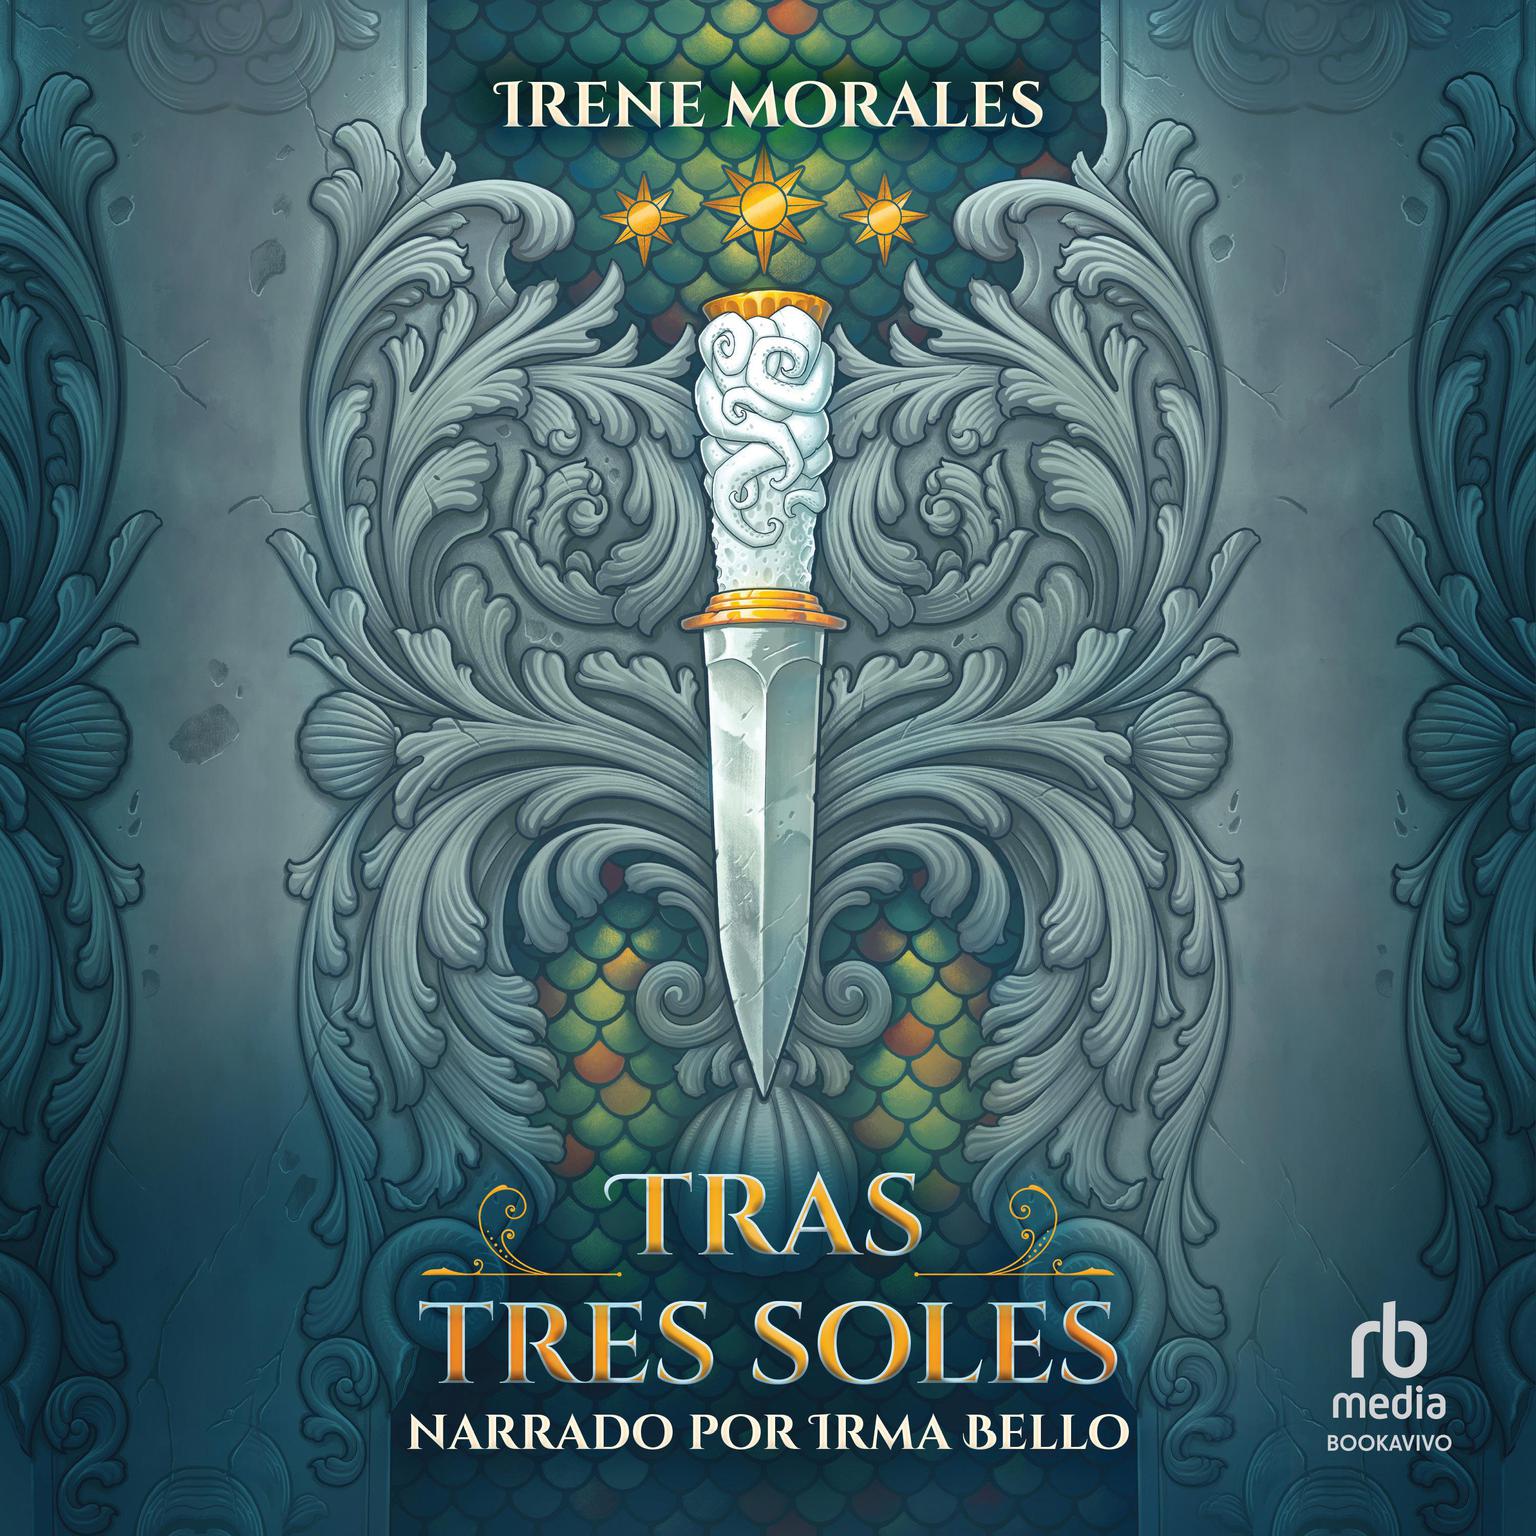 Tras tres soles (After Three Suns) Audiobook, by Irene Morales